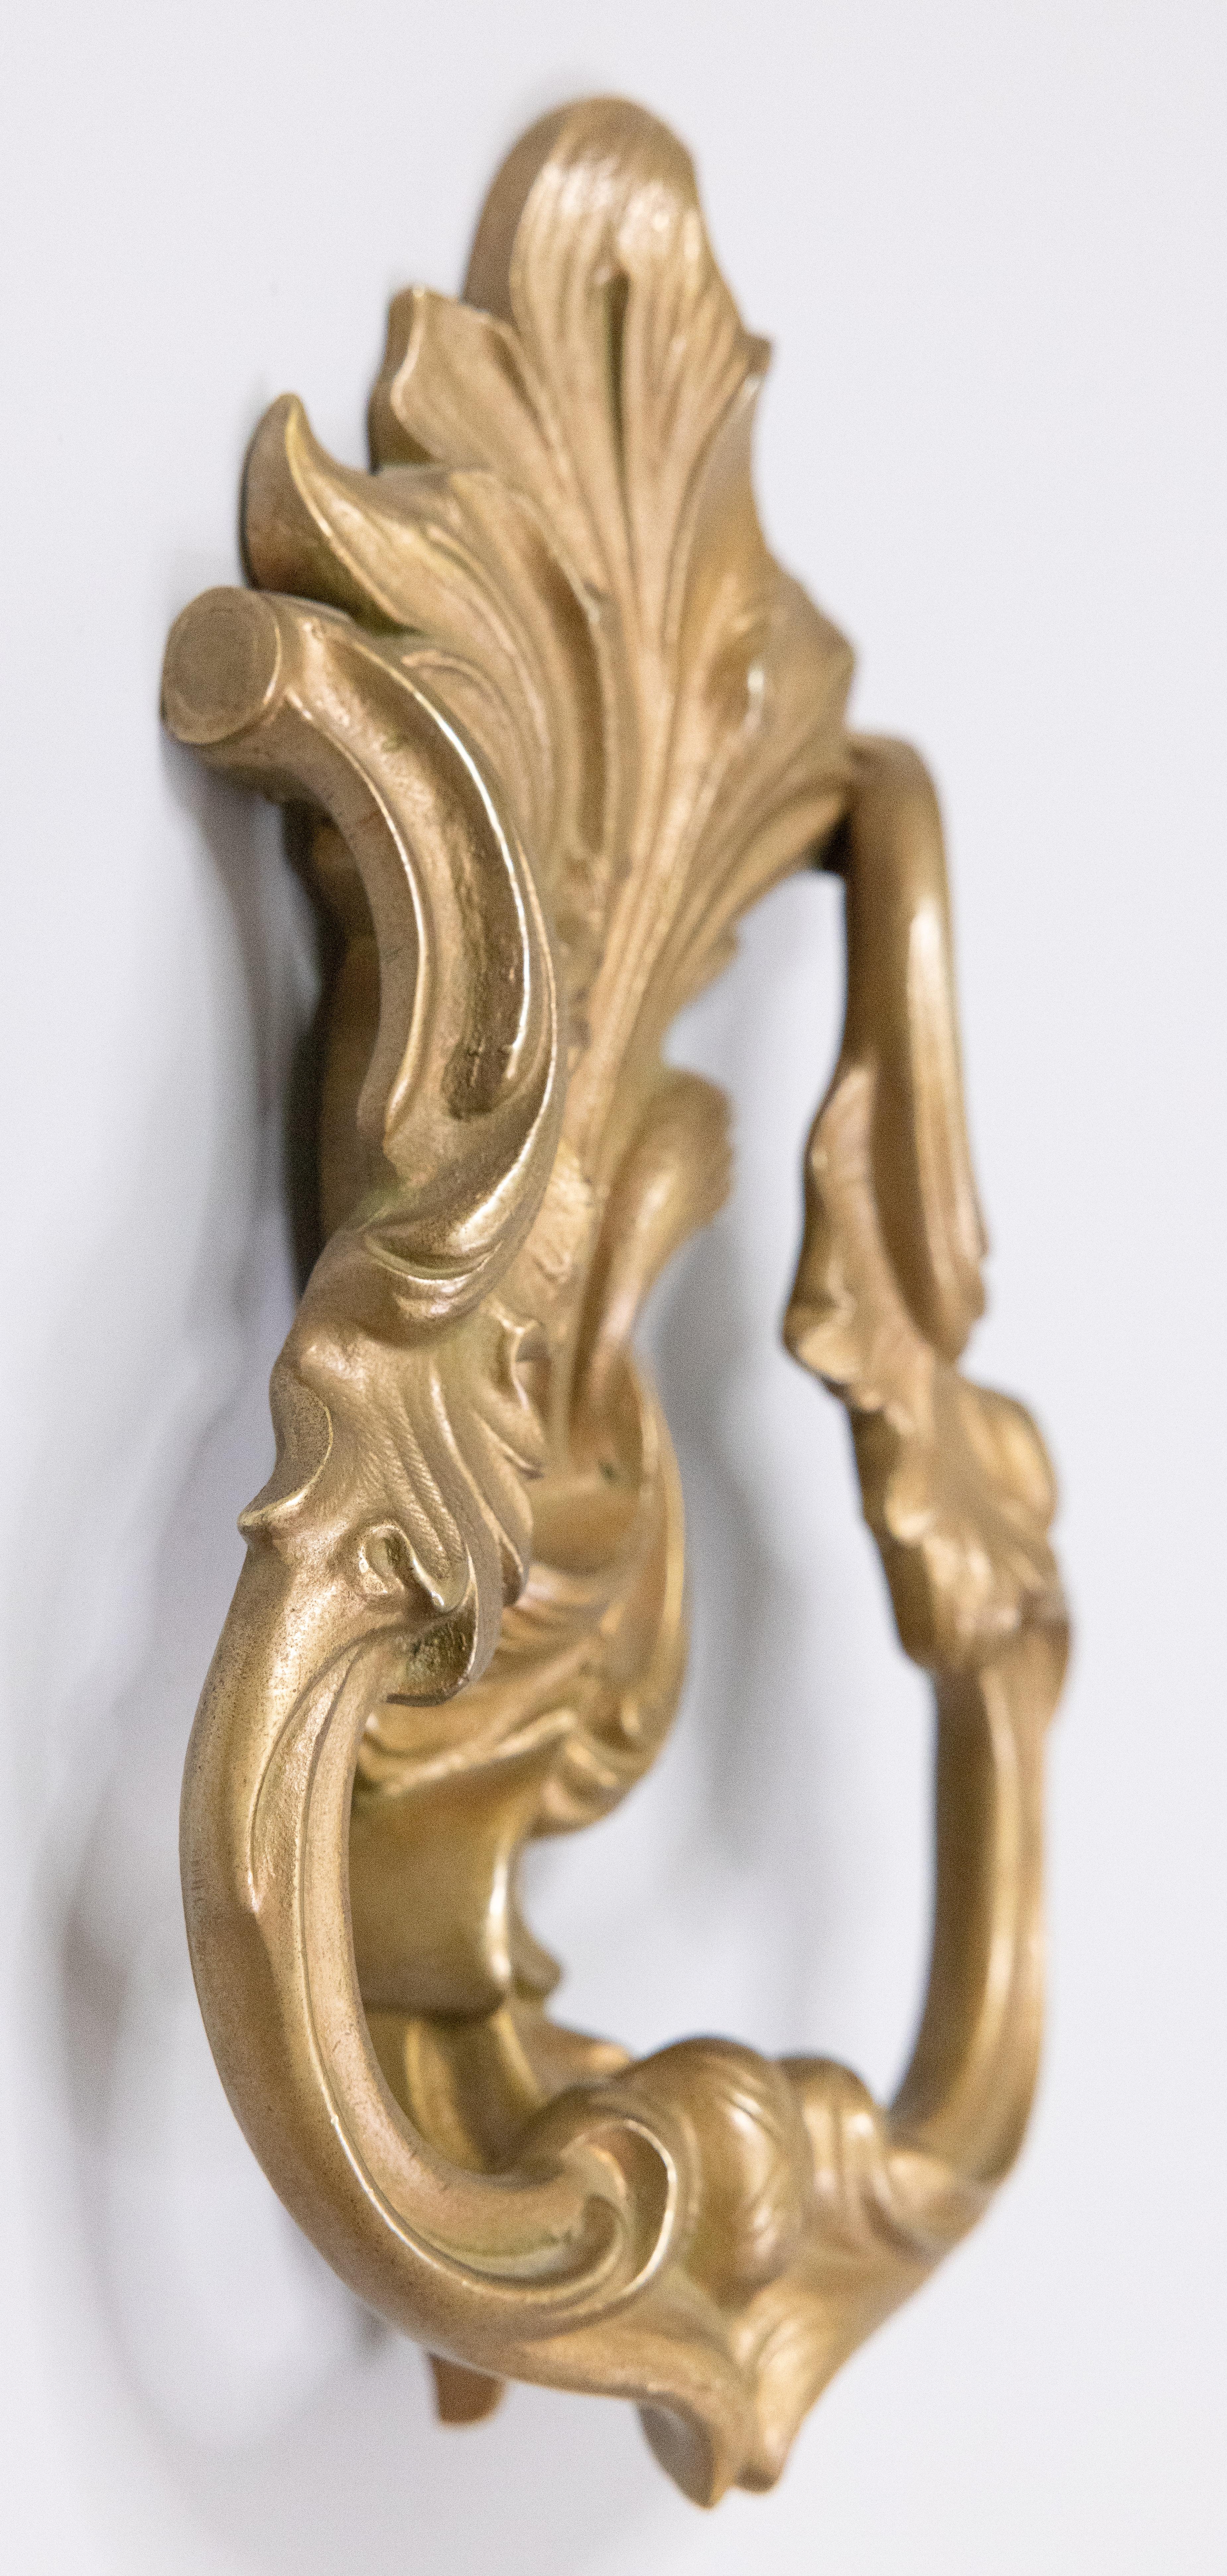 A gorgeous antique French gilded bronze Rococo style door knocker. This beautiful door knocker is solid and heavy with ornate scrolling leaves in a lovely gilt patina.